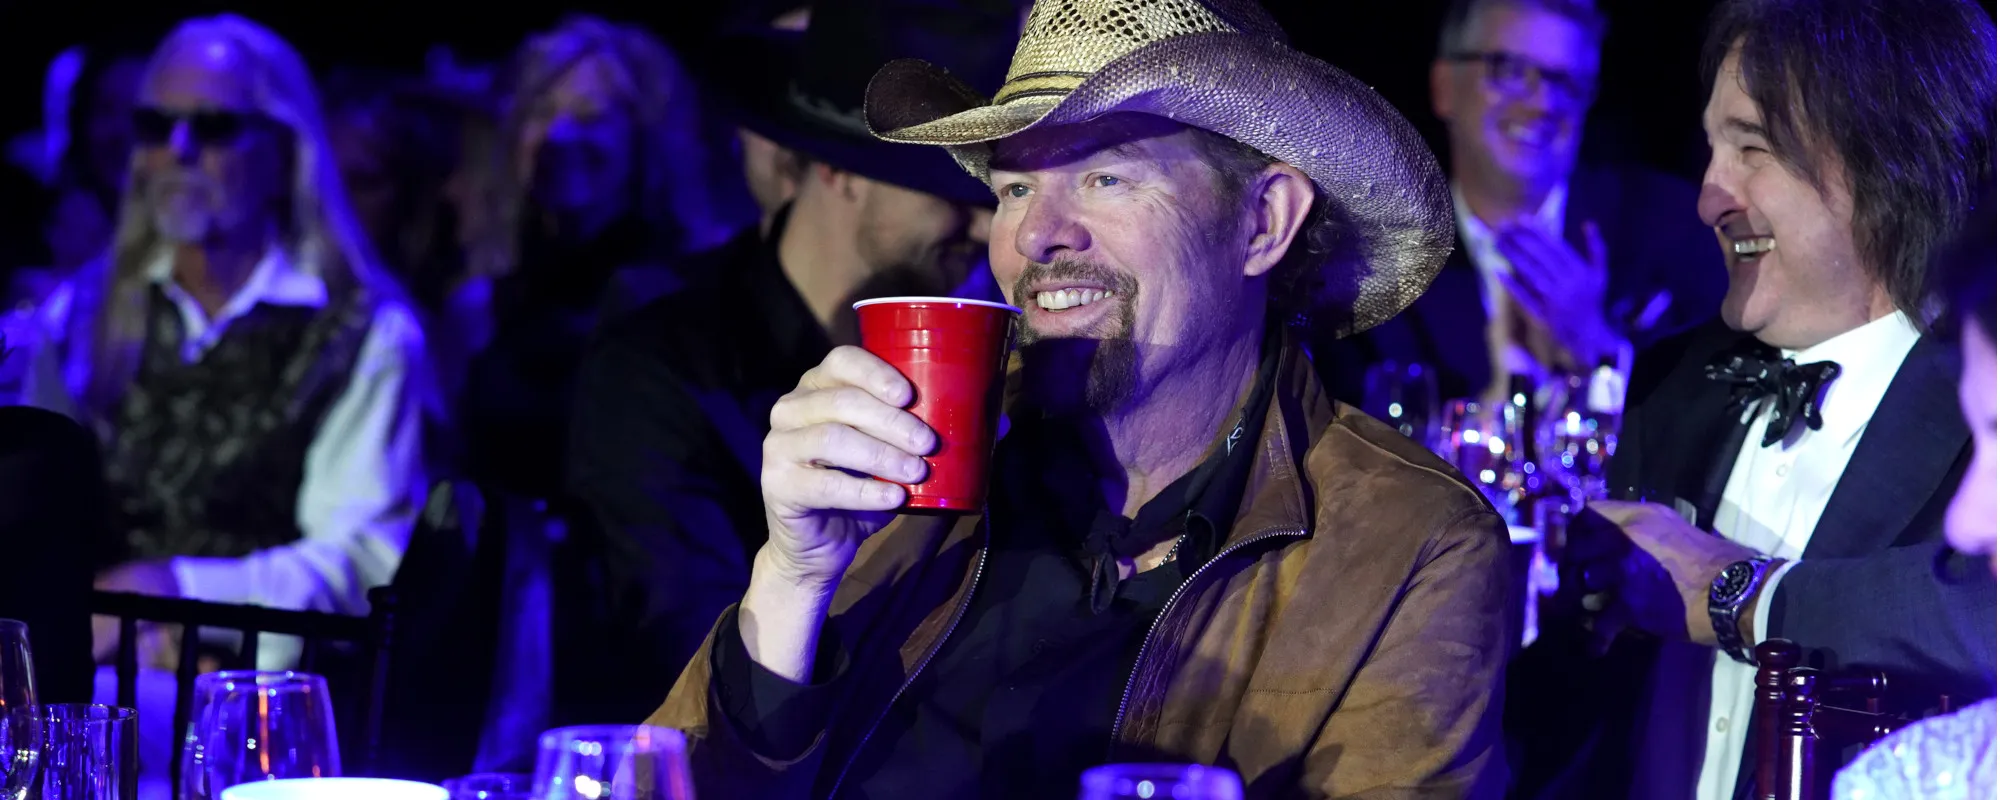 Toby Keith Reveals Clint Eastwood’s Inspiration Behind New Single “Don’t Let The Old Man In”